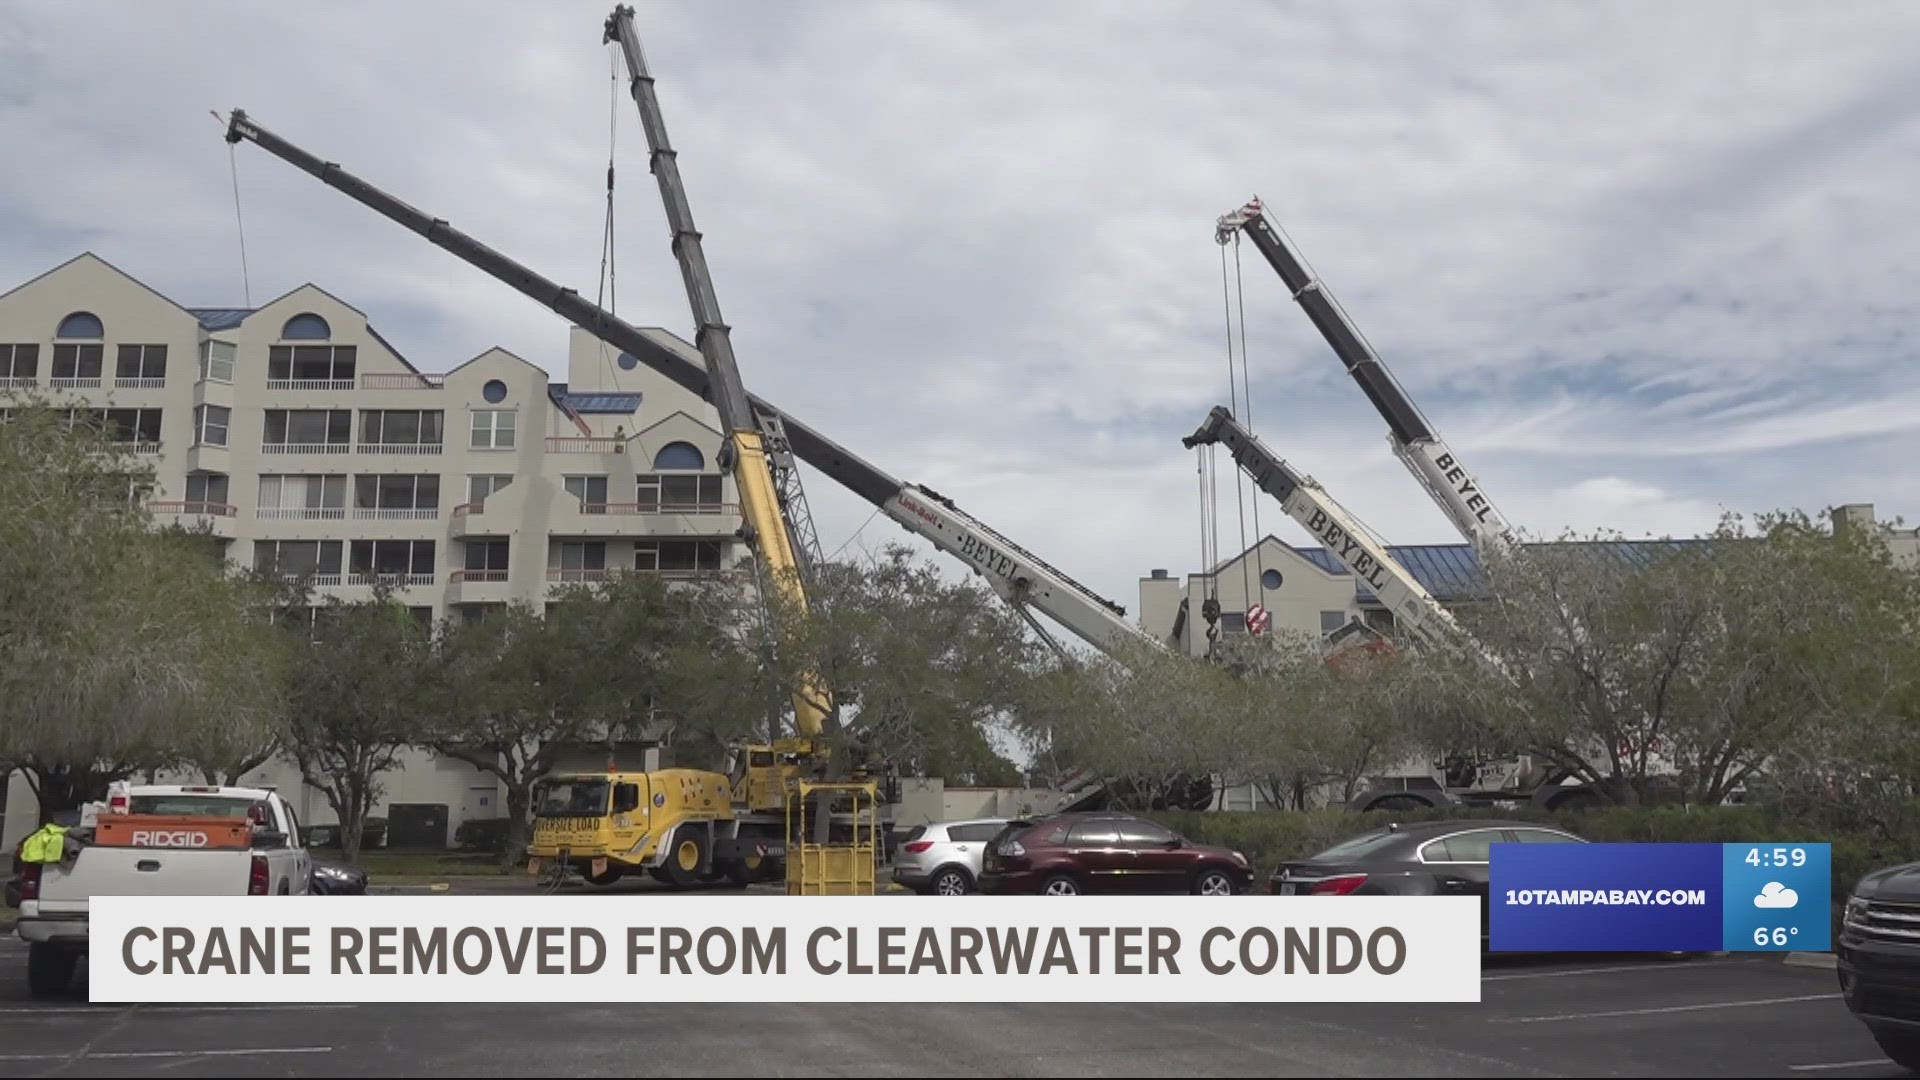 The condo association attorney said the crane fell because it exceeded its ability to lift and tipped over.